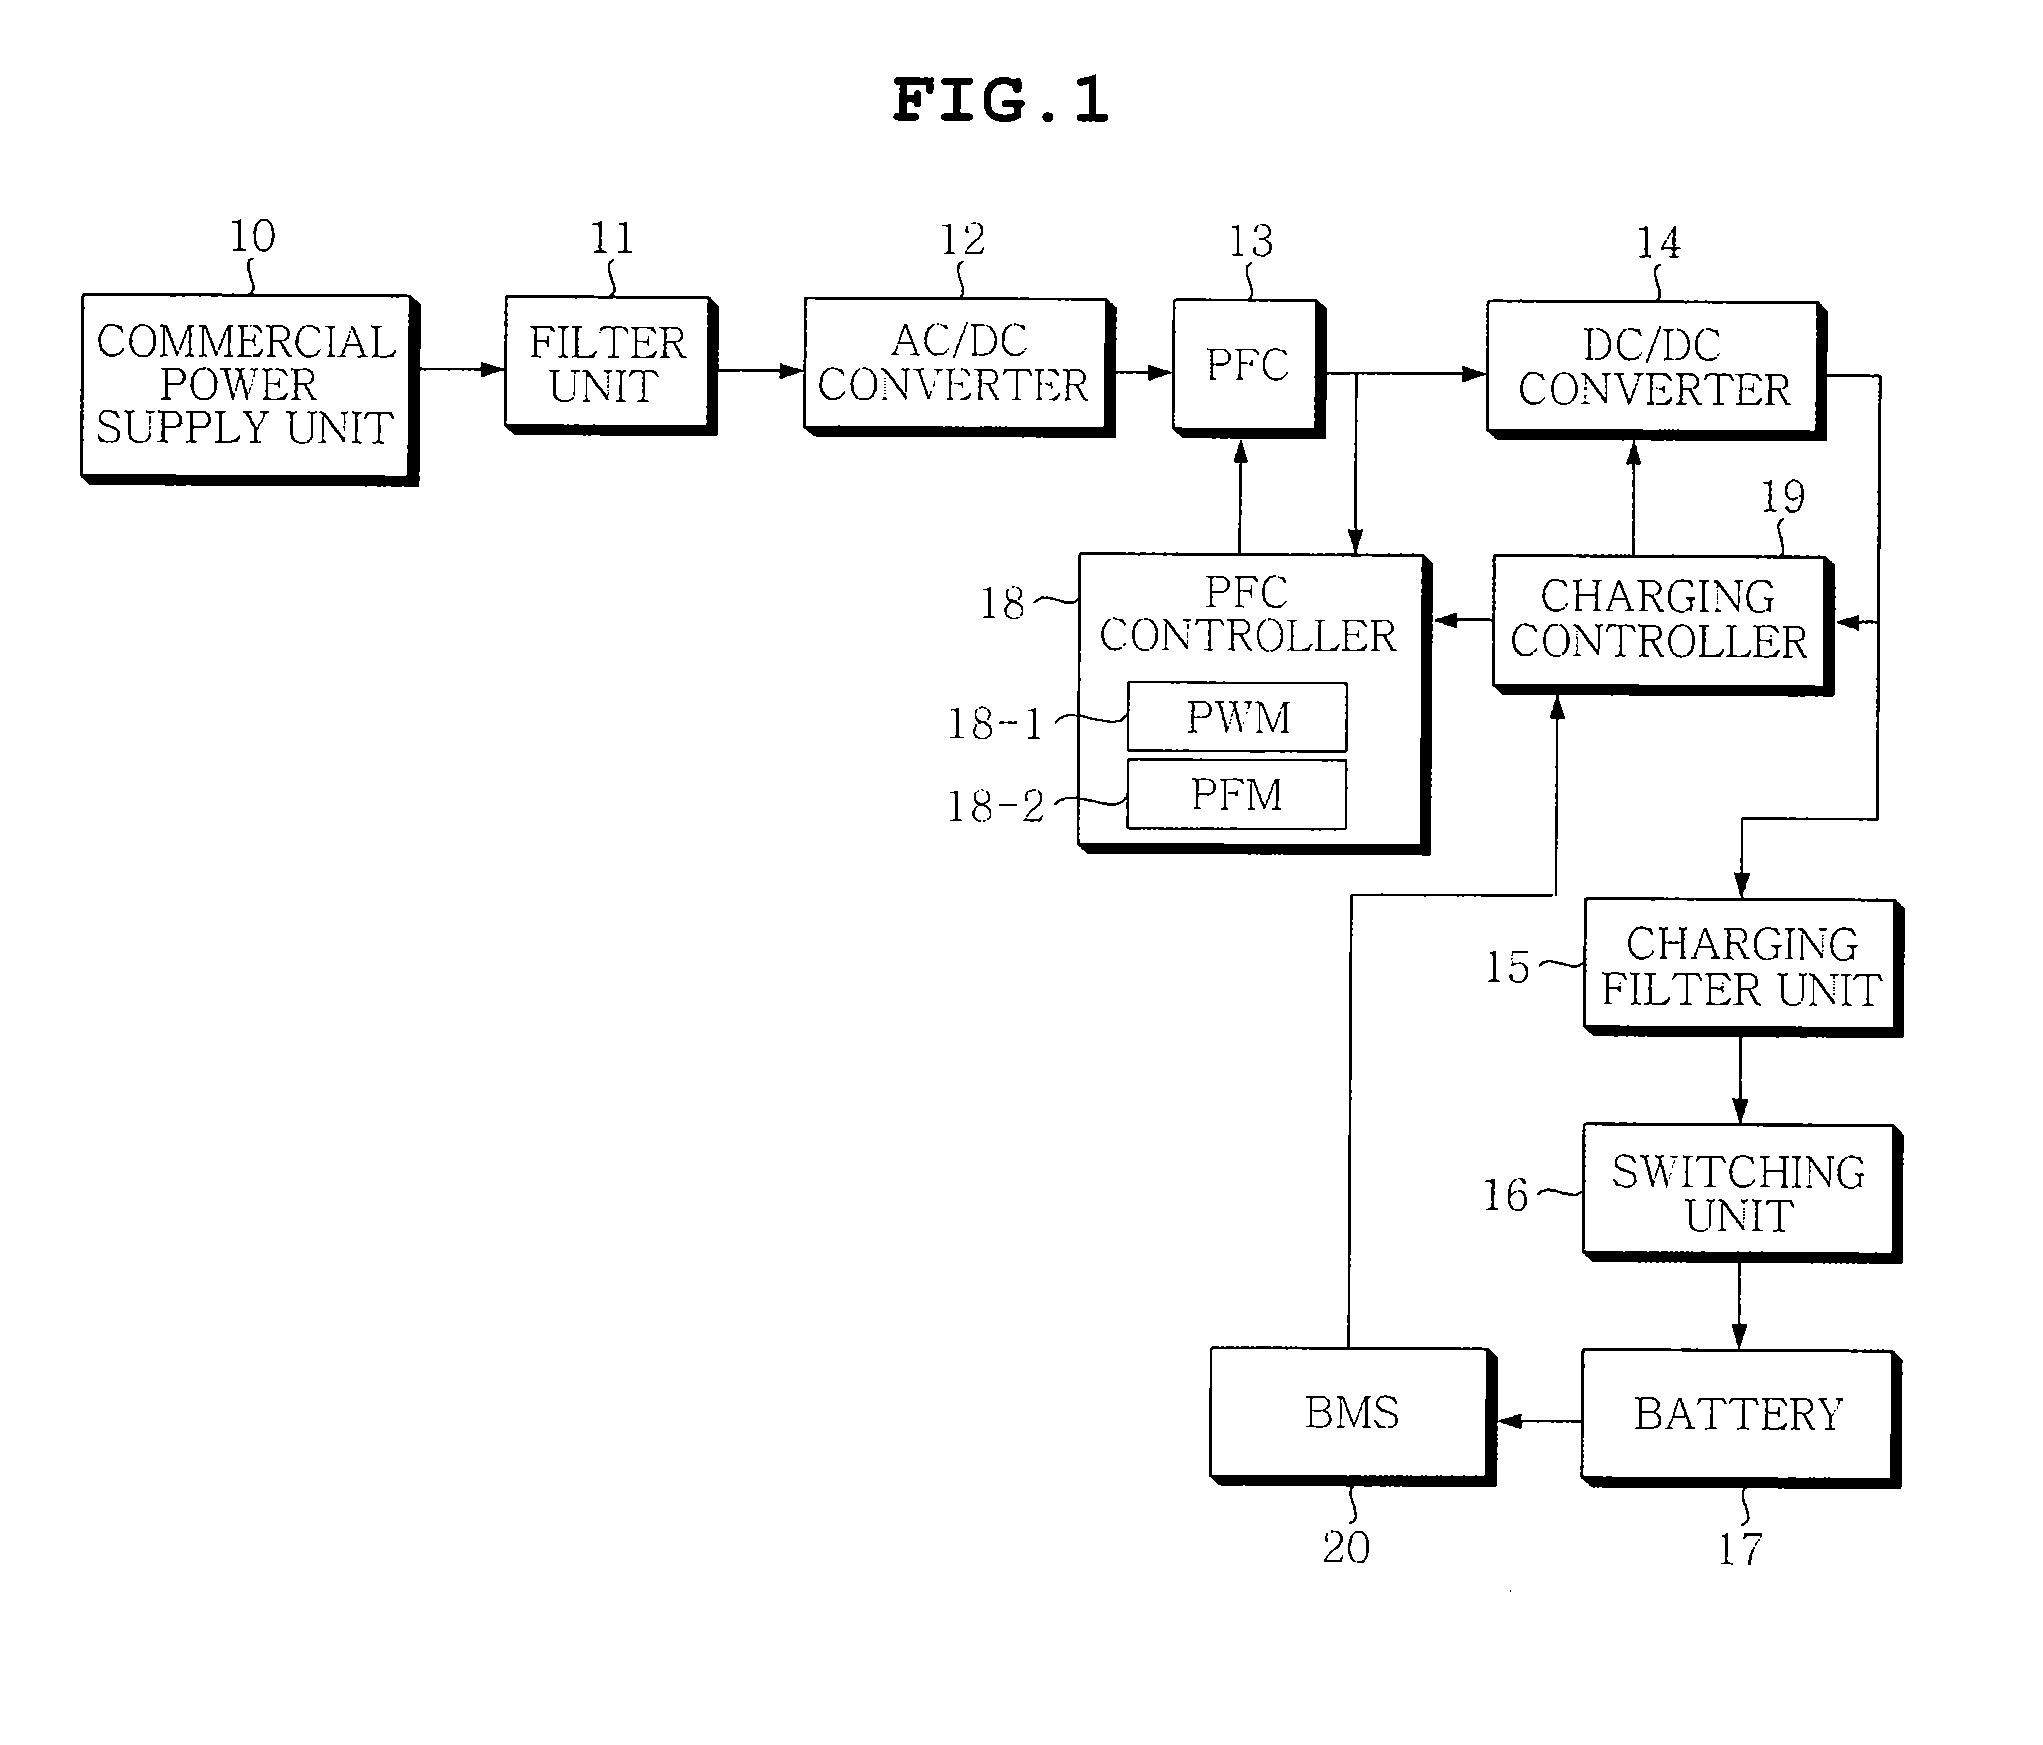 Charging equipment of variable frequency control for power factor